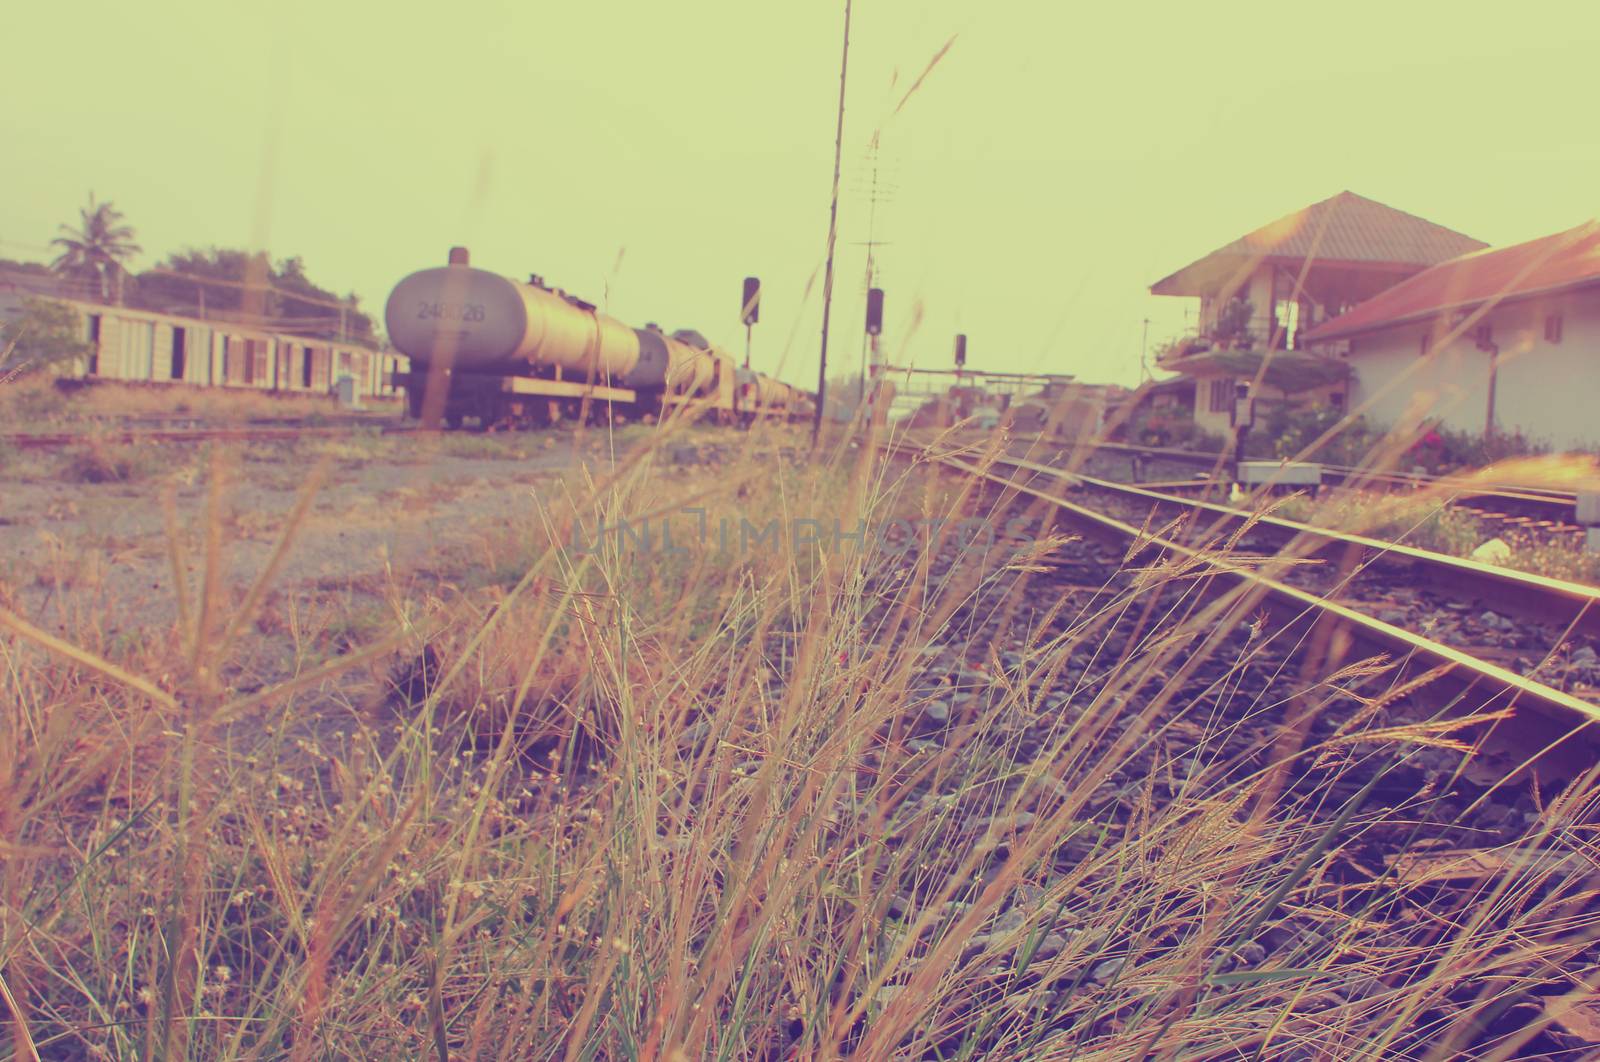 Old railway station with retro filter effect